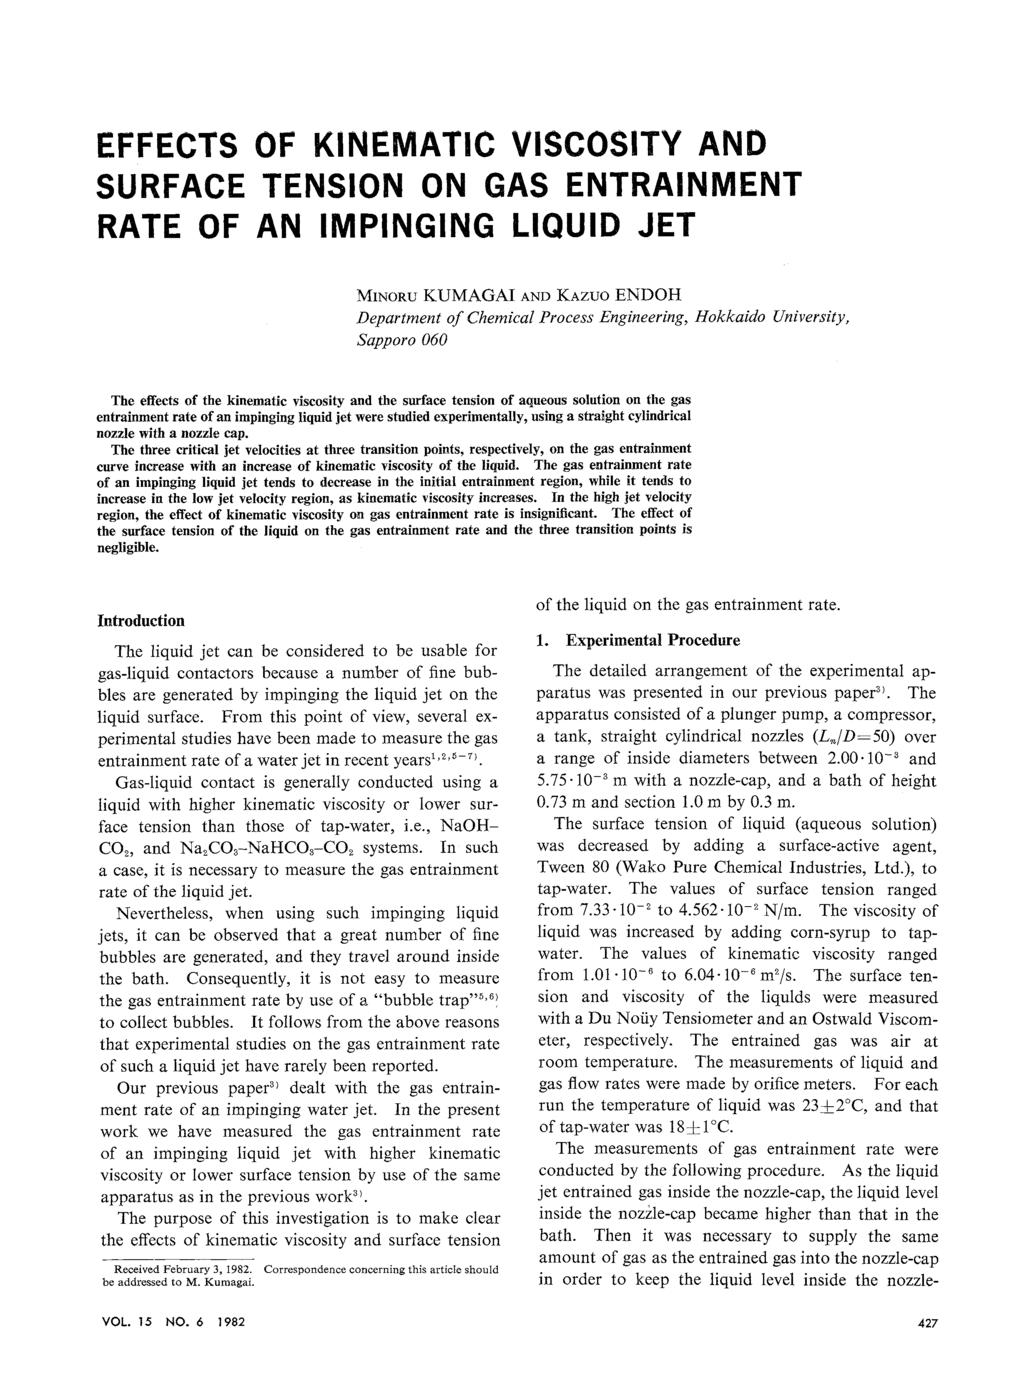 EFFECTS OF KINEMATIC VISCOSITY AND SURFACE TENSION ON GAS ENTRAPMENT RATE OF AN IMPINGING LIQUID JET Minoru KUMAGAIand Kazuo ENDOH Department of Chemical Process Engineering, Hokkaido University,